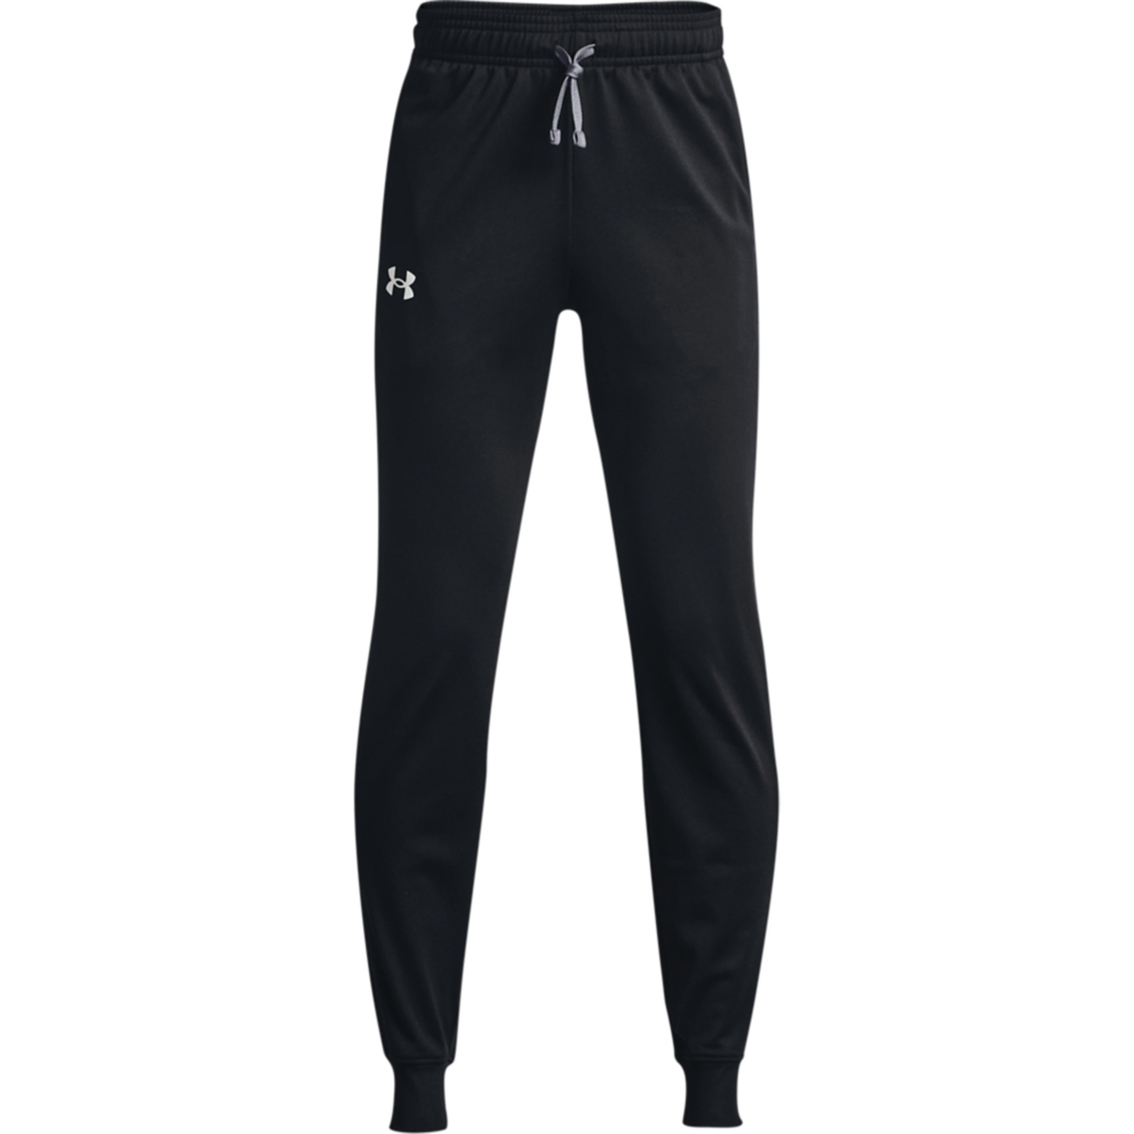 Under Armour Boys Black and Gray Brawler 2.0 Tapered Pants